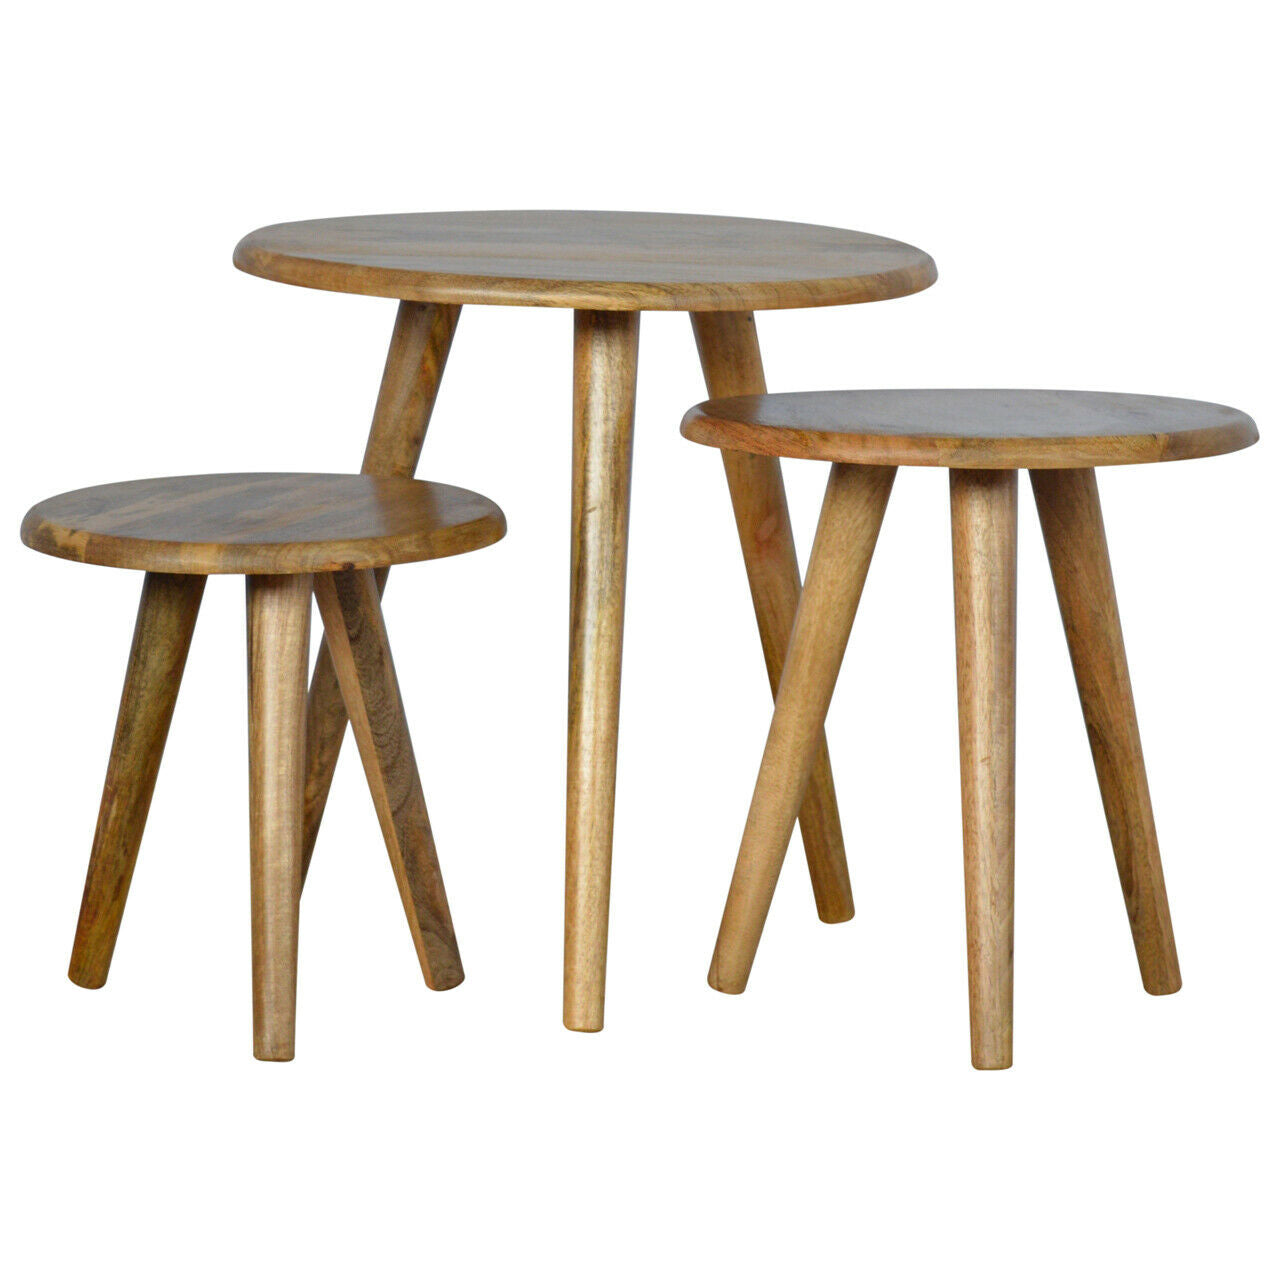 Solid Wood Nordic Style Set of 3 Stools